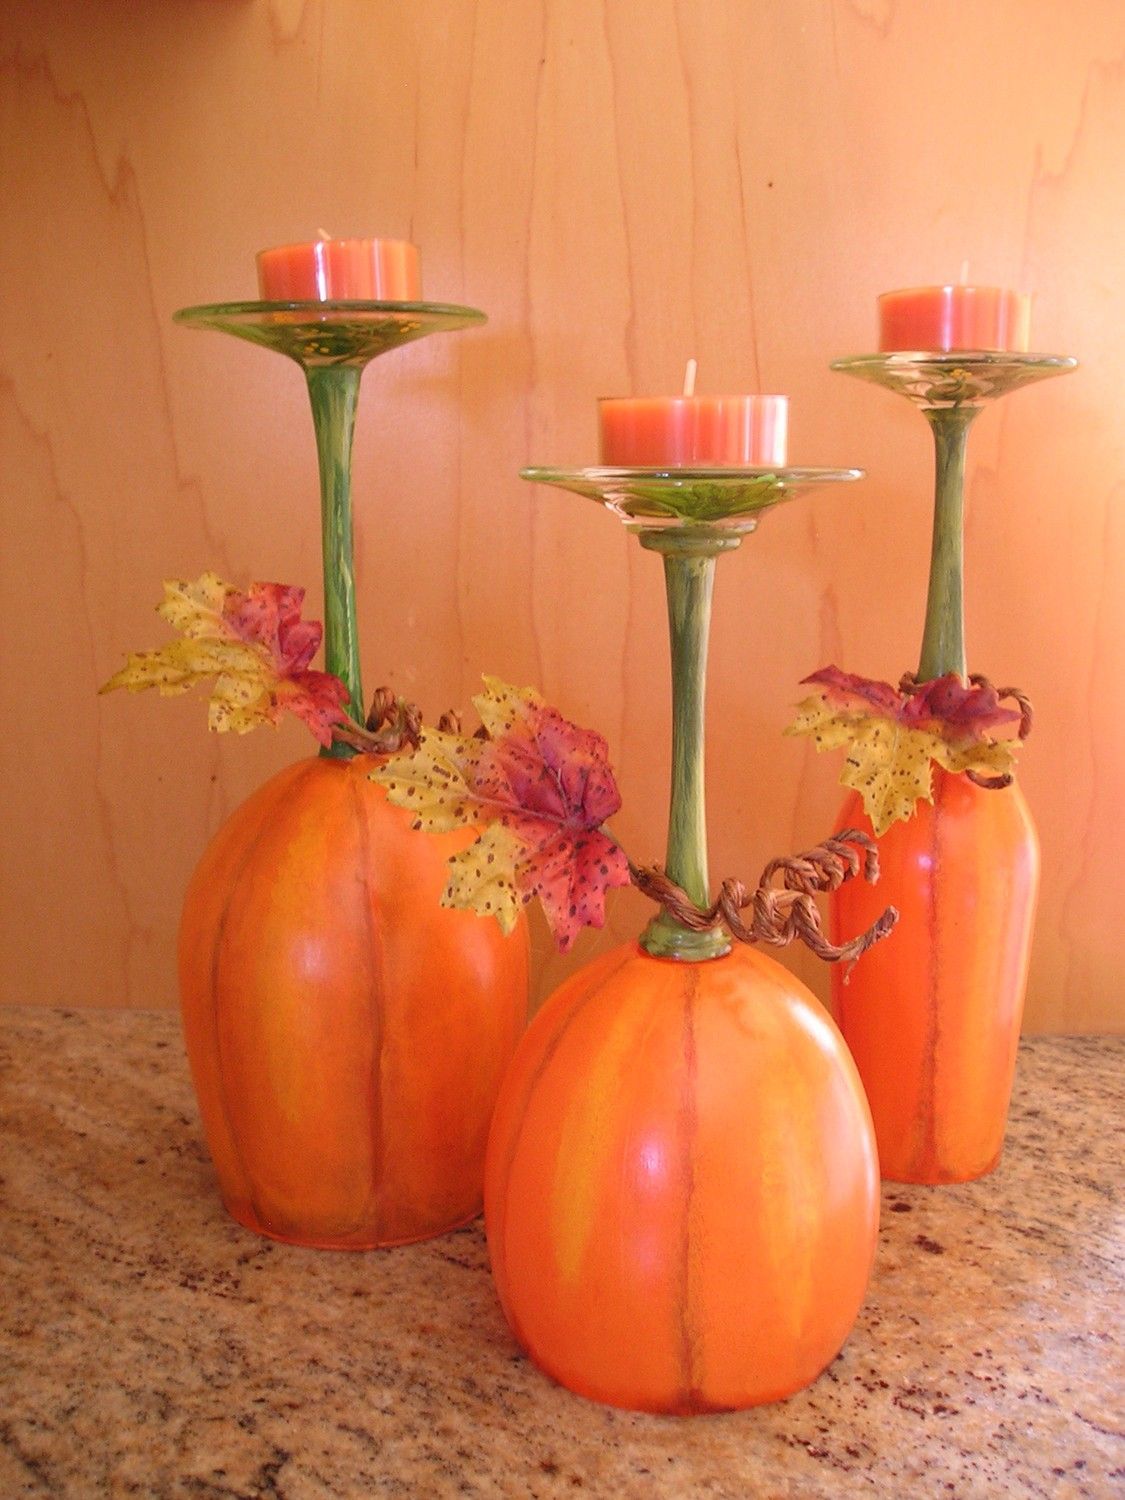 Pumpkin Patch Wine Glass Candle Holders…wine glasses painted like pumpkins and used as candle holders